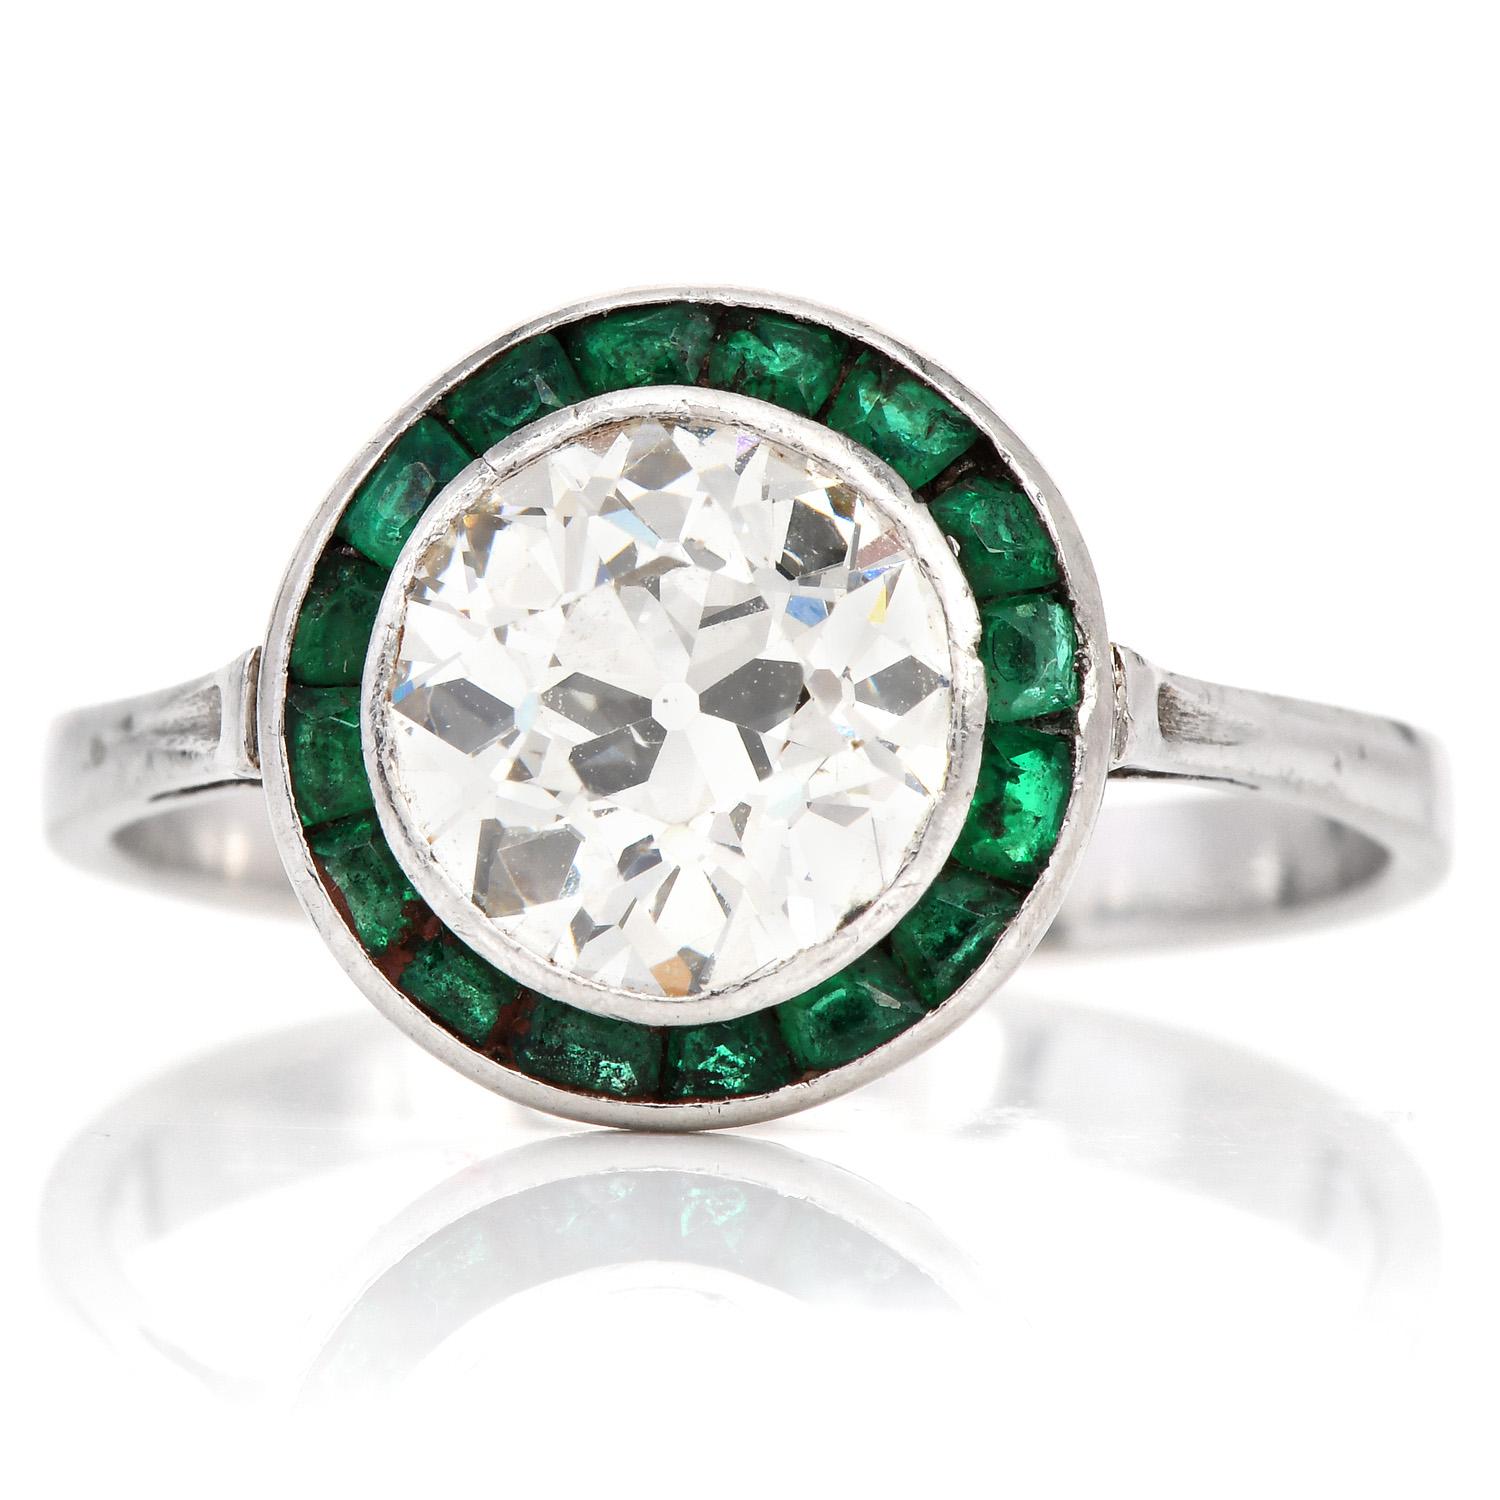 An exquisite Old European cut center diamond enhanced by a halo of Emerald gemstones.

This exquisite ring is crafted in solid Platinum. Centered with an Old European cut Genuine Diamond, Bezel set, weighing 2.00 carat, H-I  color &